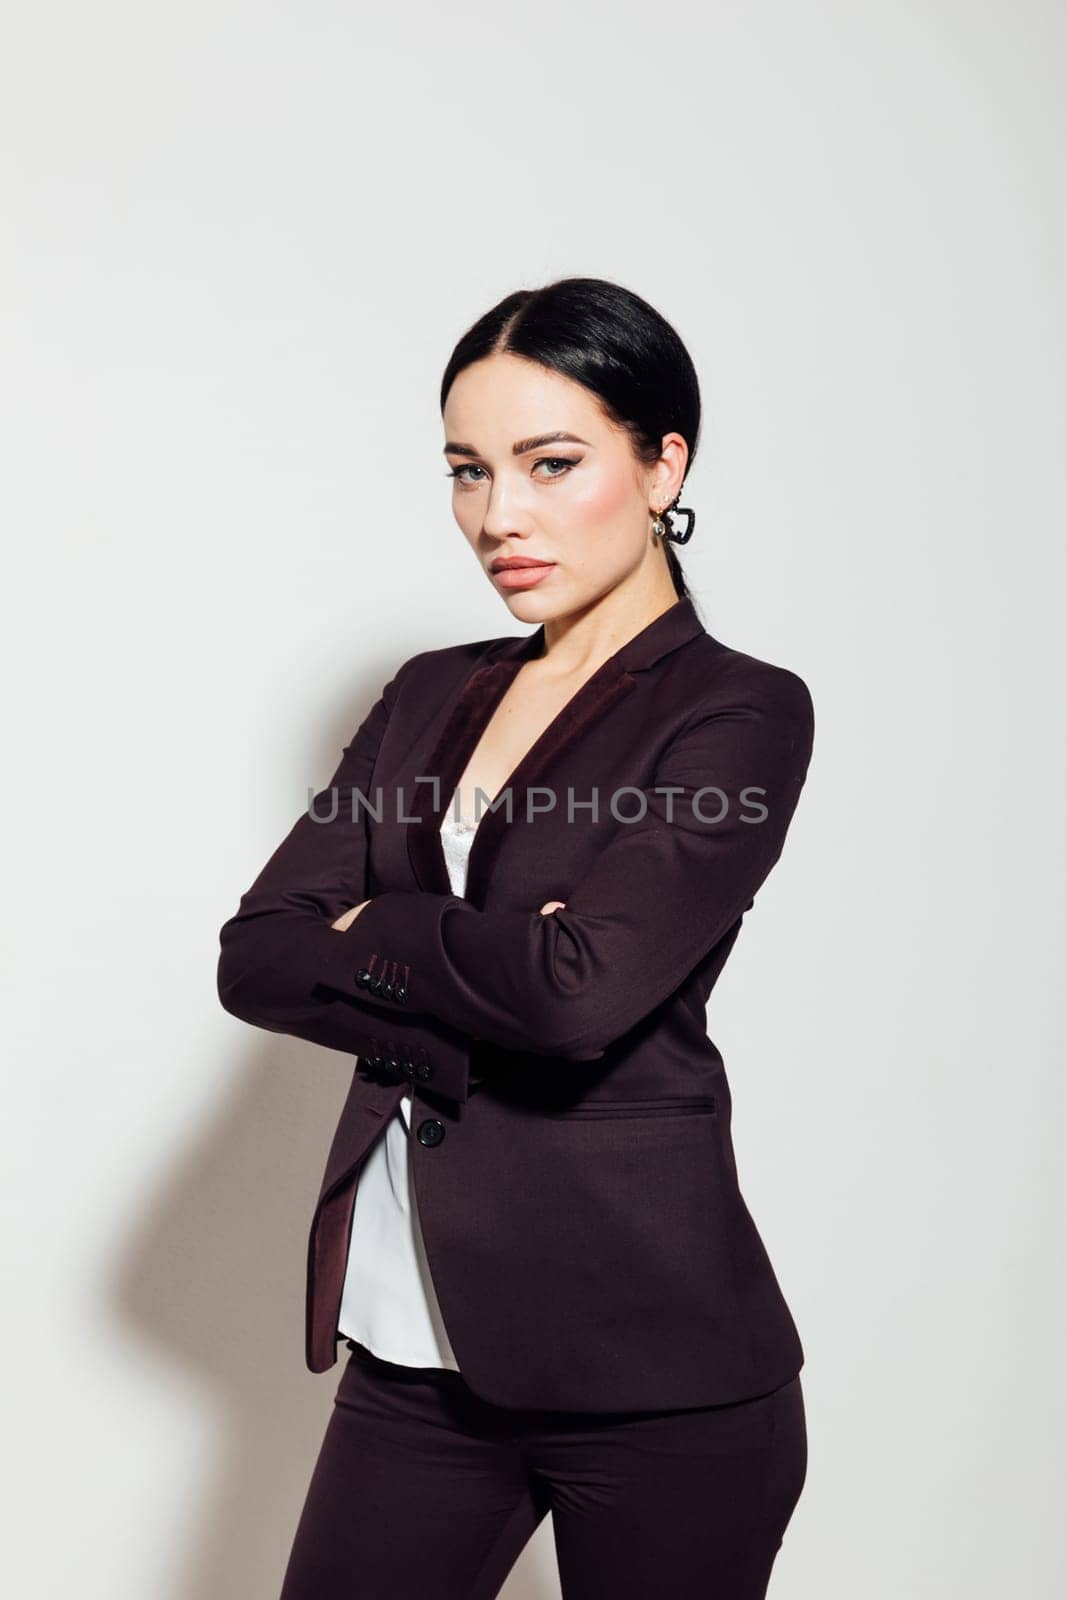 a business woman in a black suit stands on a white background by Simakov